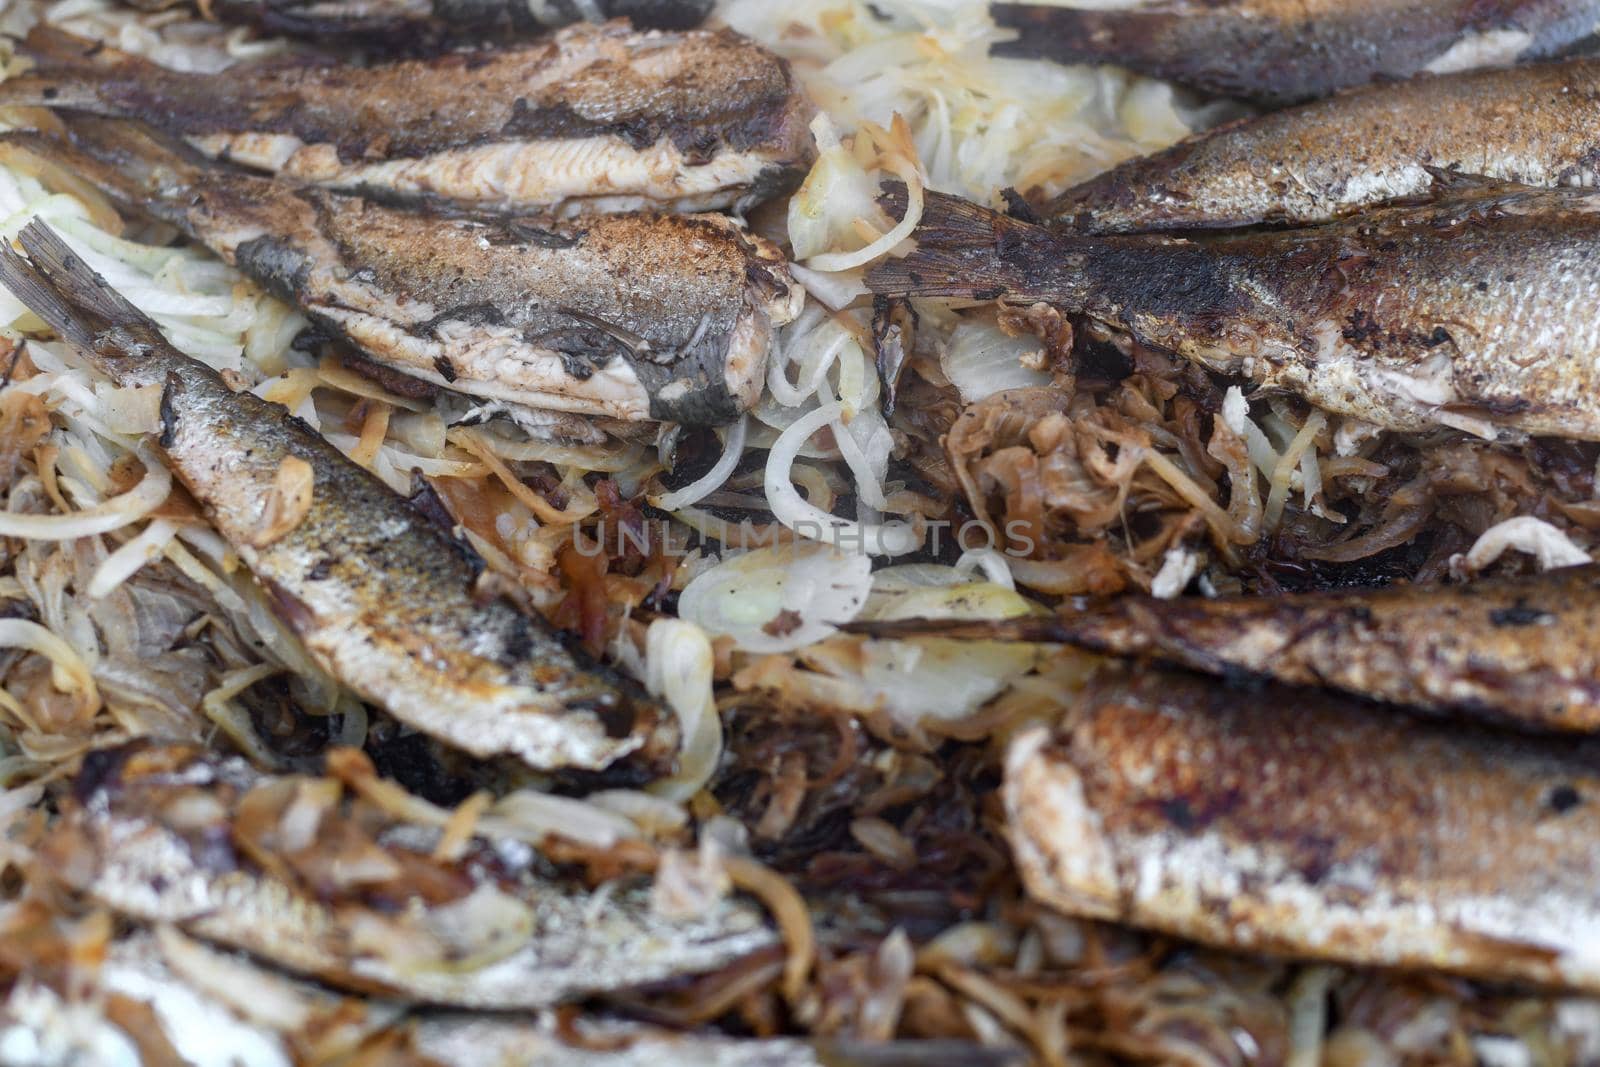 Herring on the grill on a street market